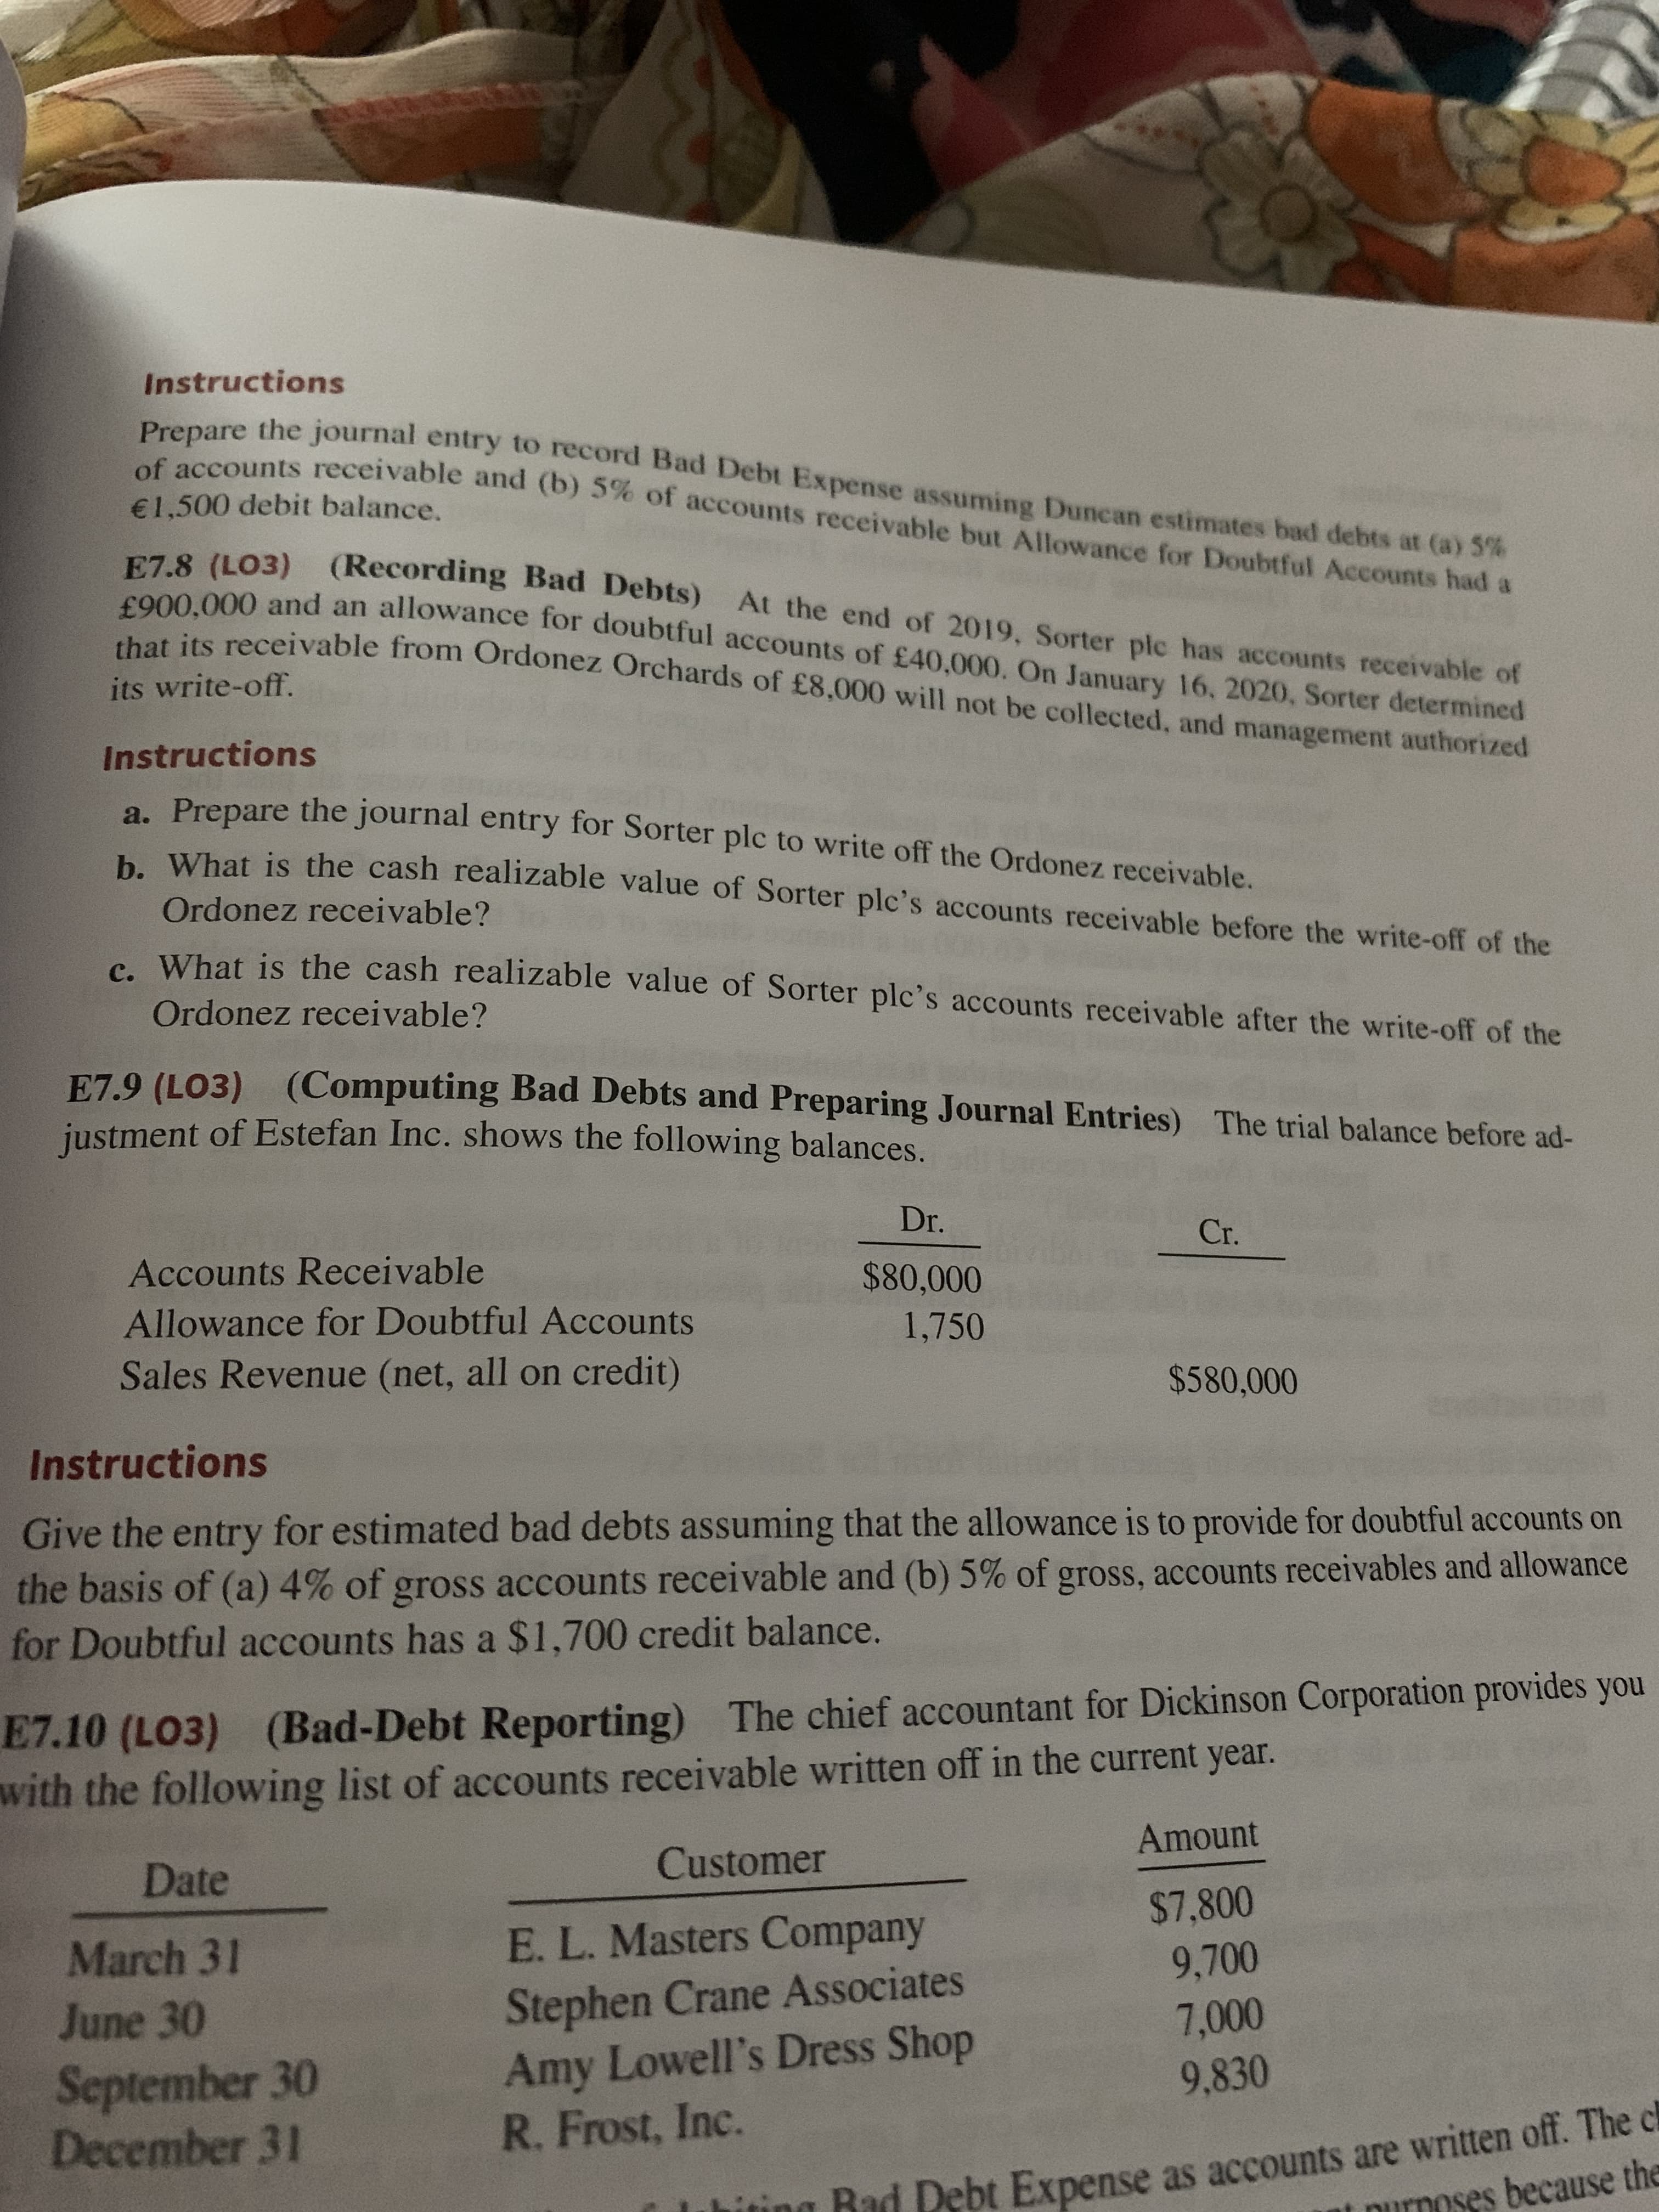 E7.9 (LO3) (Computing Bad Debts and Preparing Journal Entries) The trial balance before ad-
justment of Estefan Inc. shows the following balances.
Dr.
Cr.
Accounts Receivable
$80,000
Allowance for Doubtful Accounts
1,750
Sales Revenue (net, all on credit)
$580,000
Instructions
Give the entry for estimated bad debts assuming that the allowance is to provide for doubtful accounts on
the basis of (a) 4% of gross accounts receivable and (b) 5% of gross, accounts receivables and allowance
for Doubtful accounts has a $1,700 credit balance.
